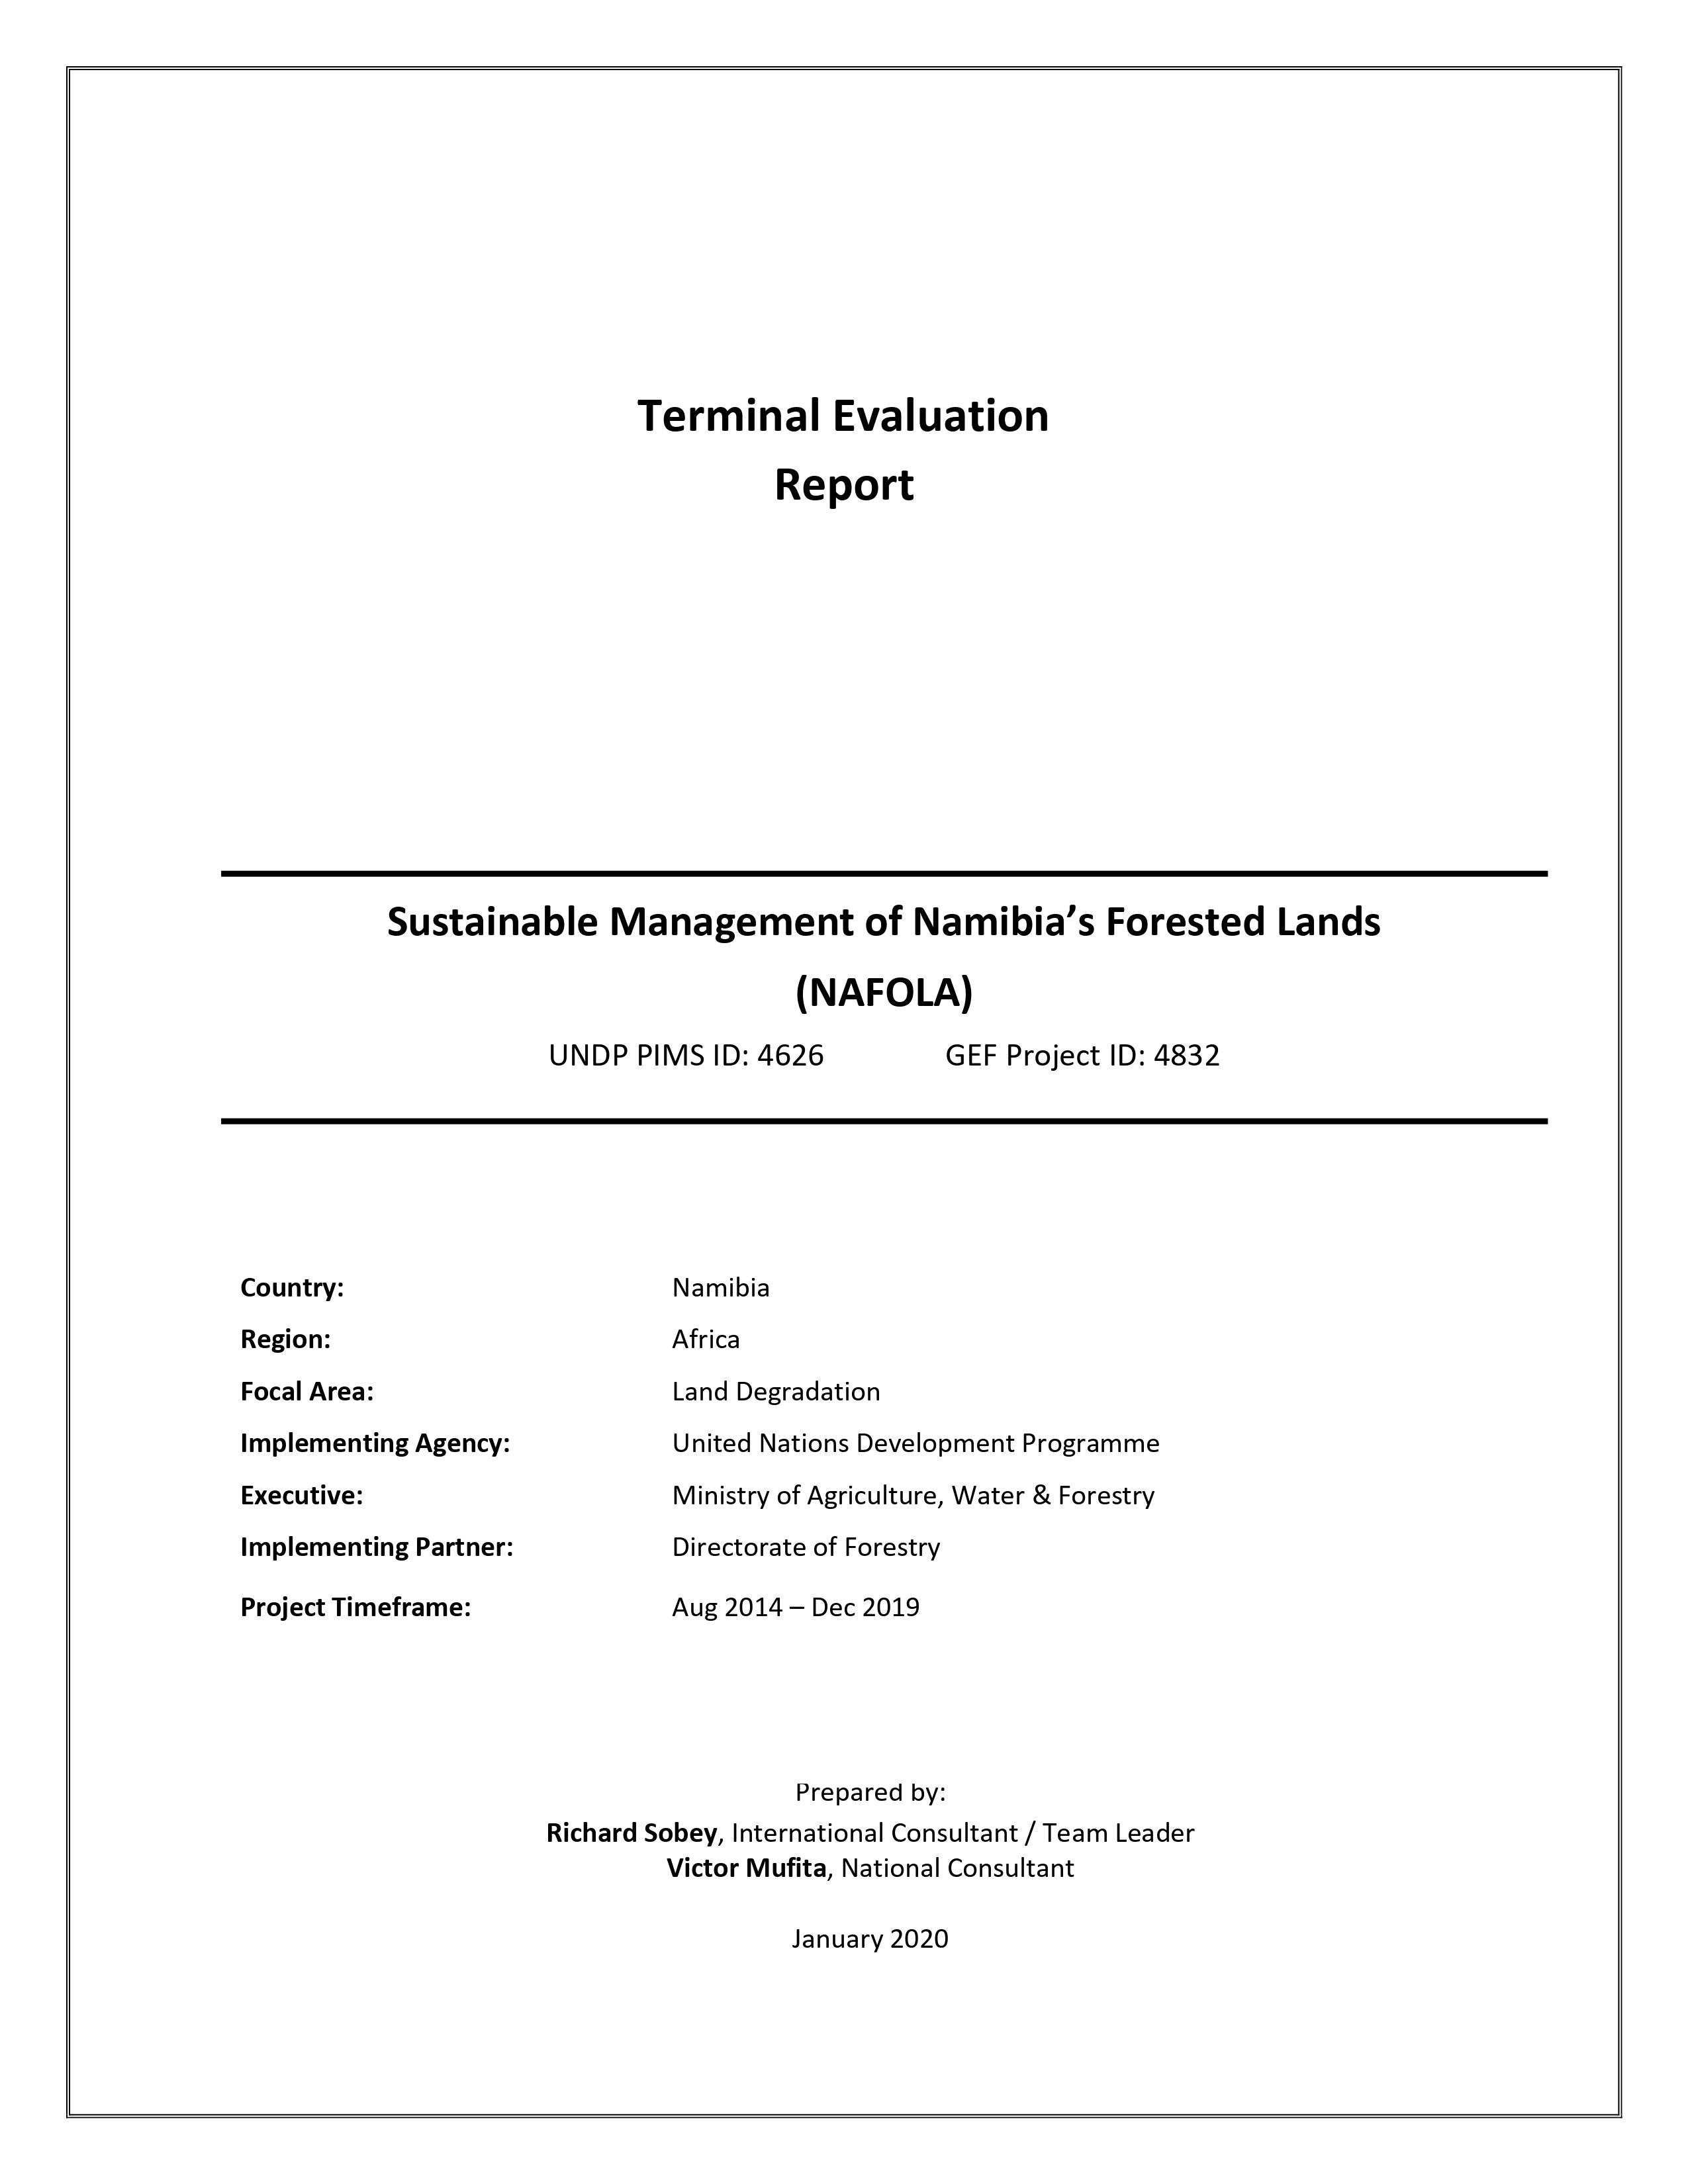 Sustainable Management of Namibia's Forested Lands (NAFOLA) Final Evaluation